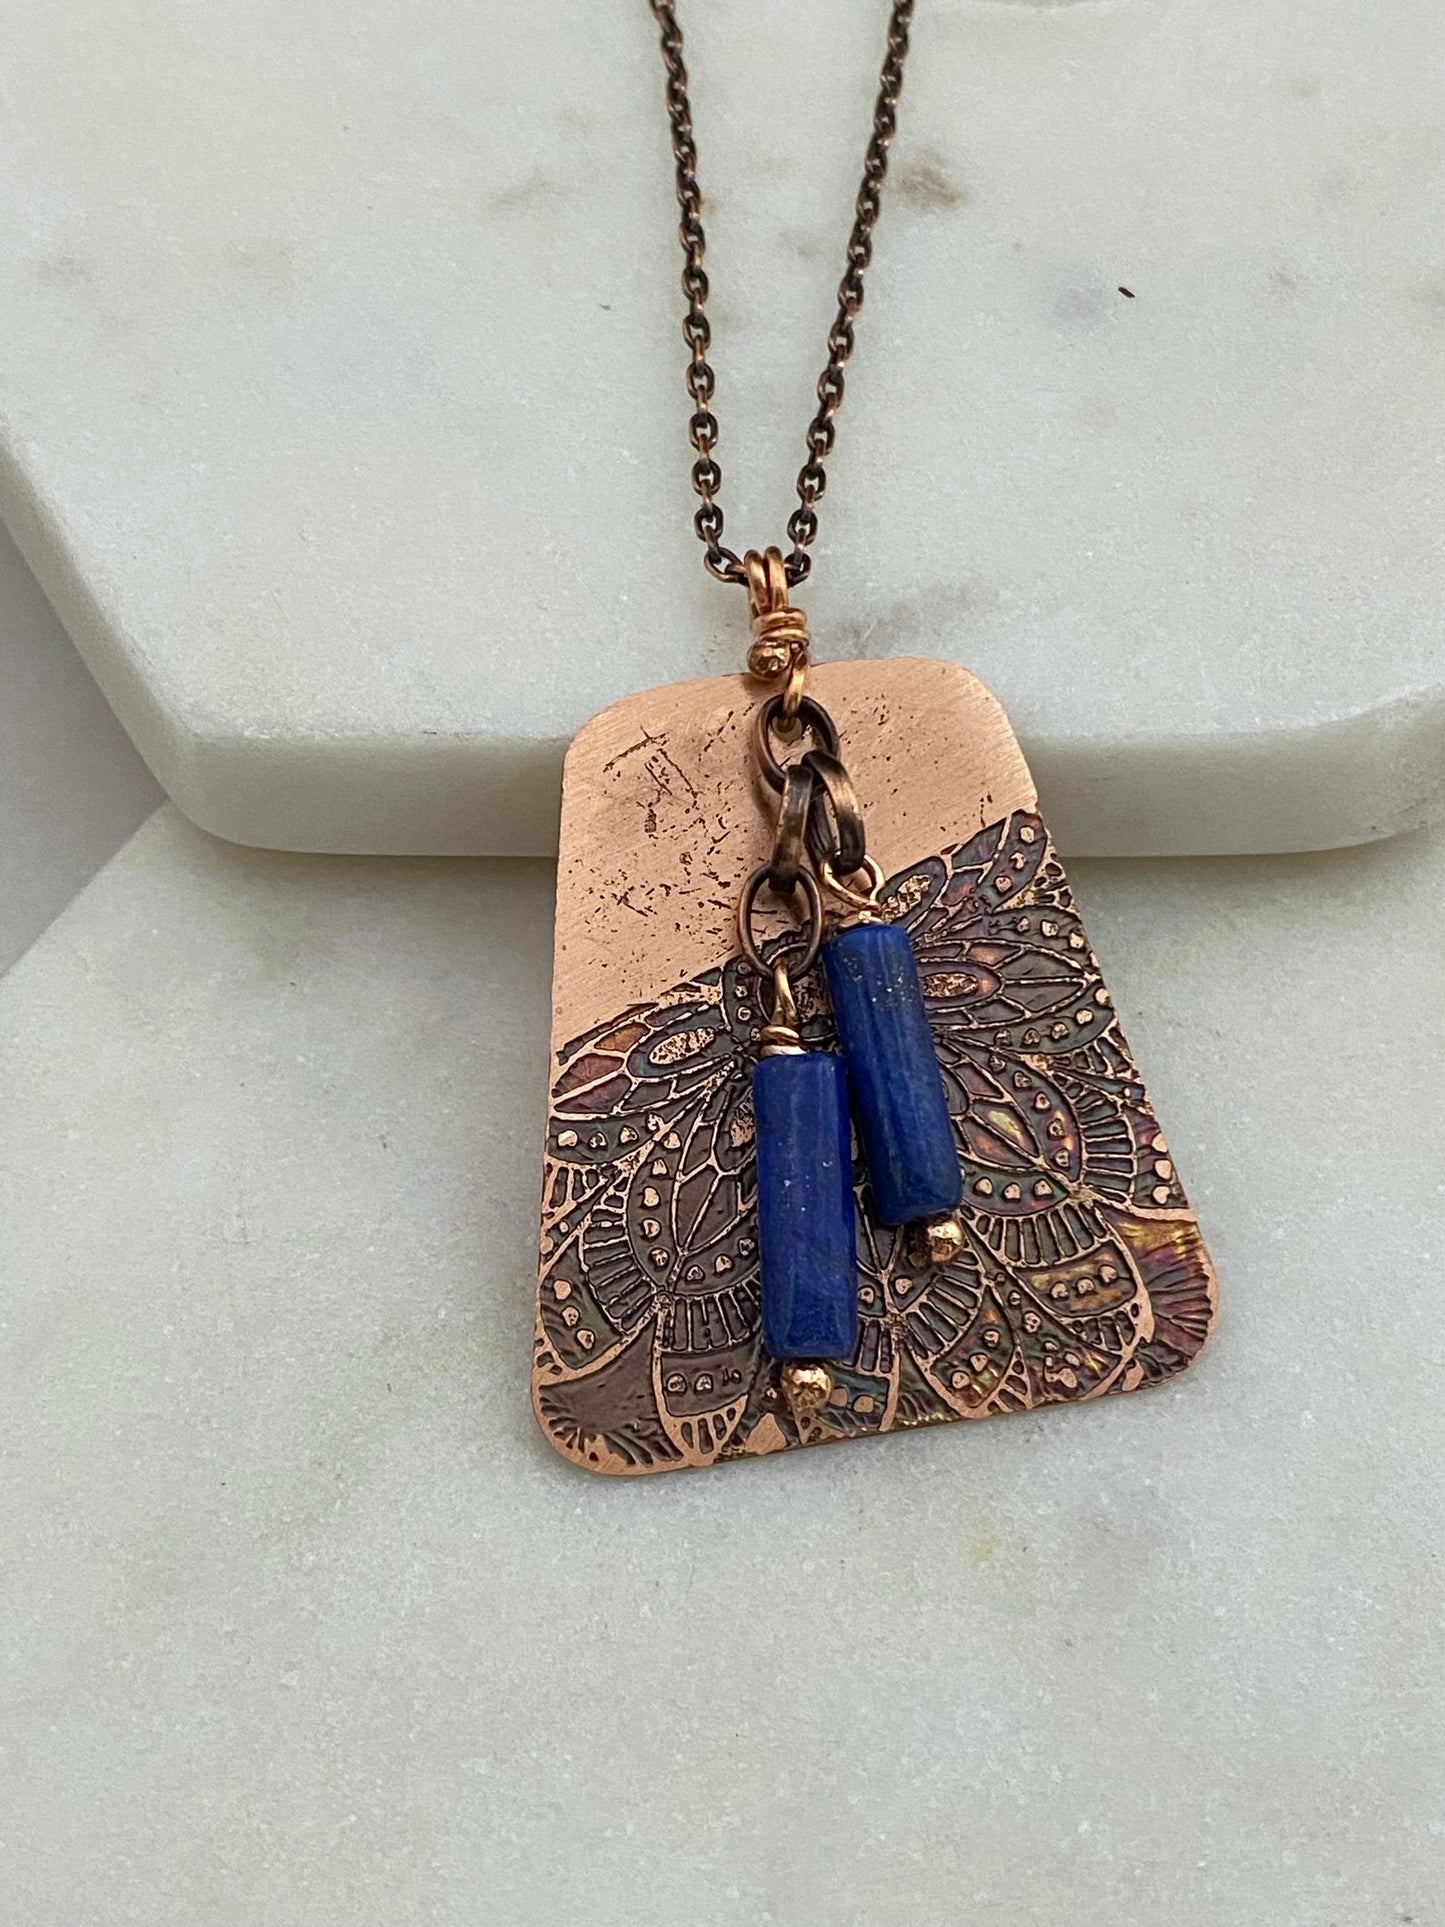 Acid etched copper necklace with lapis gemstone